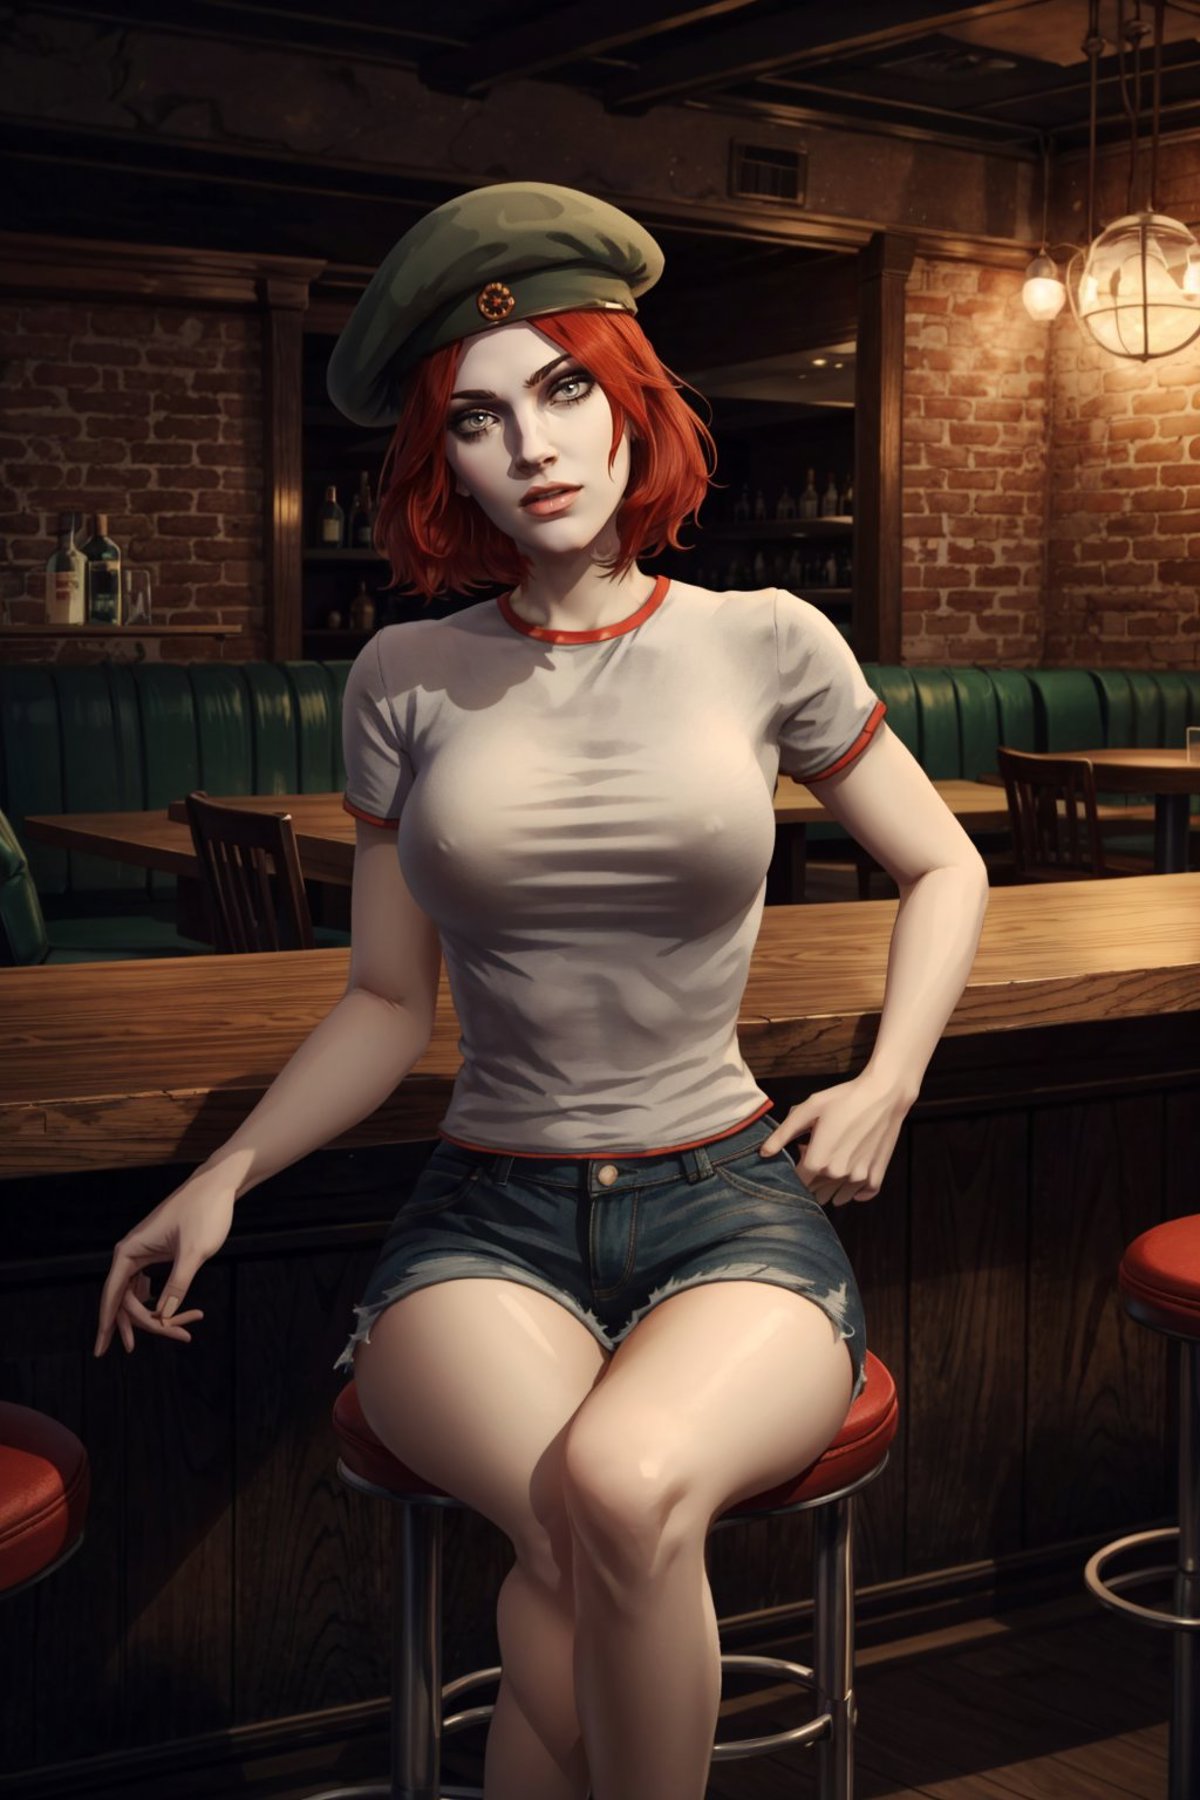 Damsel | Vampire: The Masquerade - Bloodlines image by soul3142